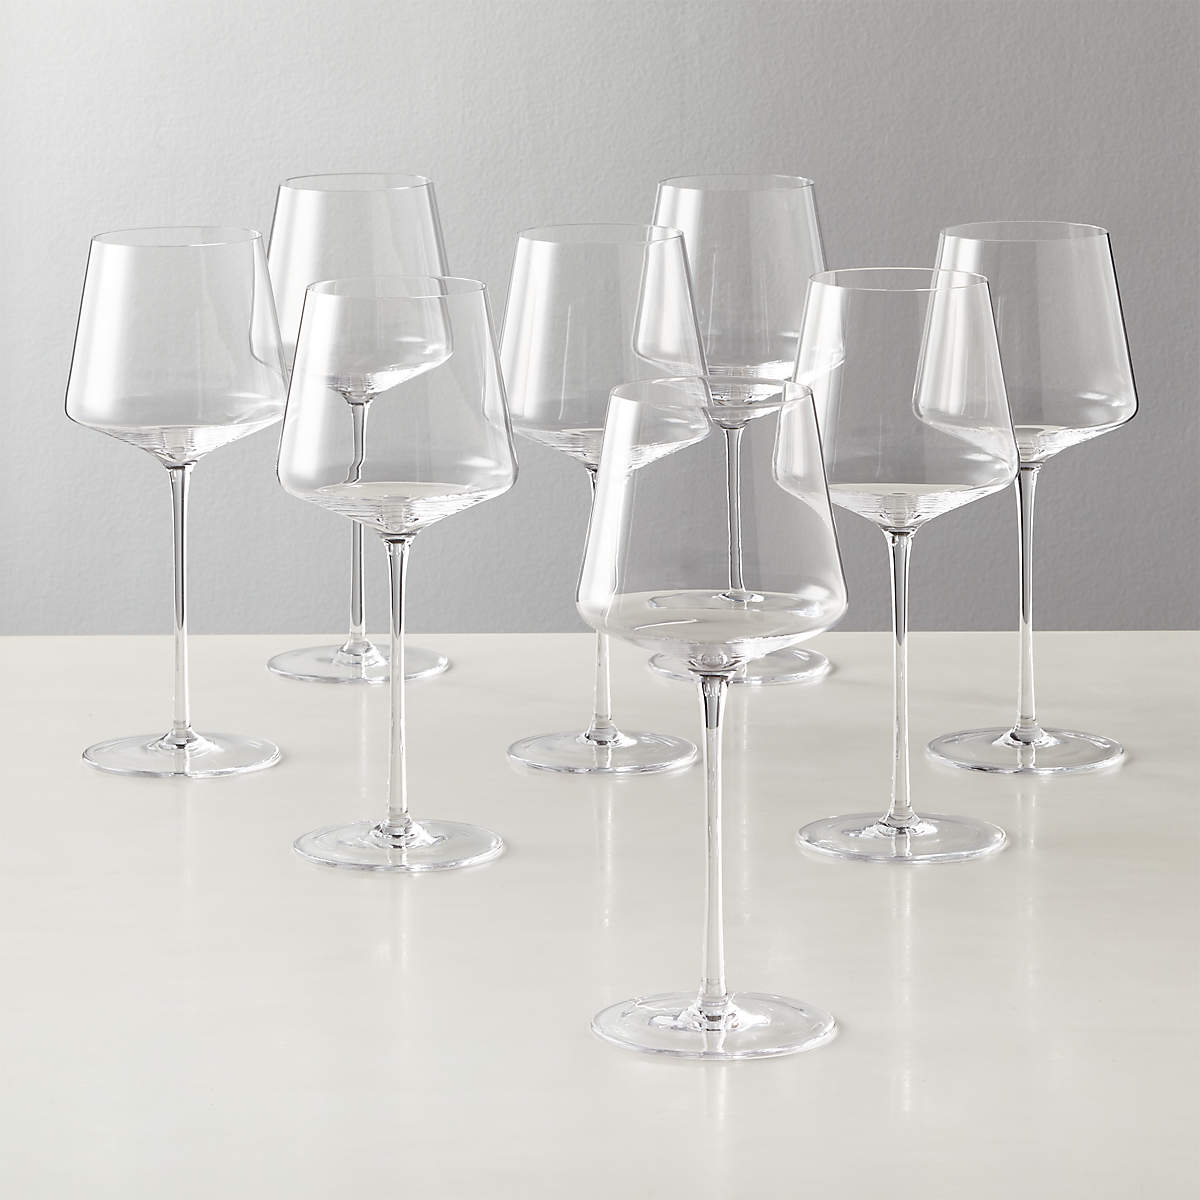 Muse Red Wine Glasses Set of 8- image 1 of 2 - CB2 

Thanksgiving entertaining staple  pieces